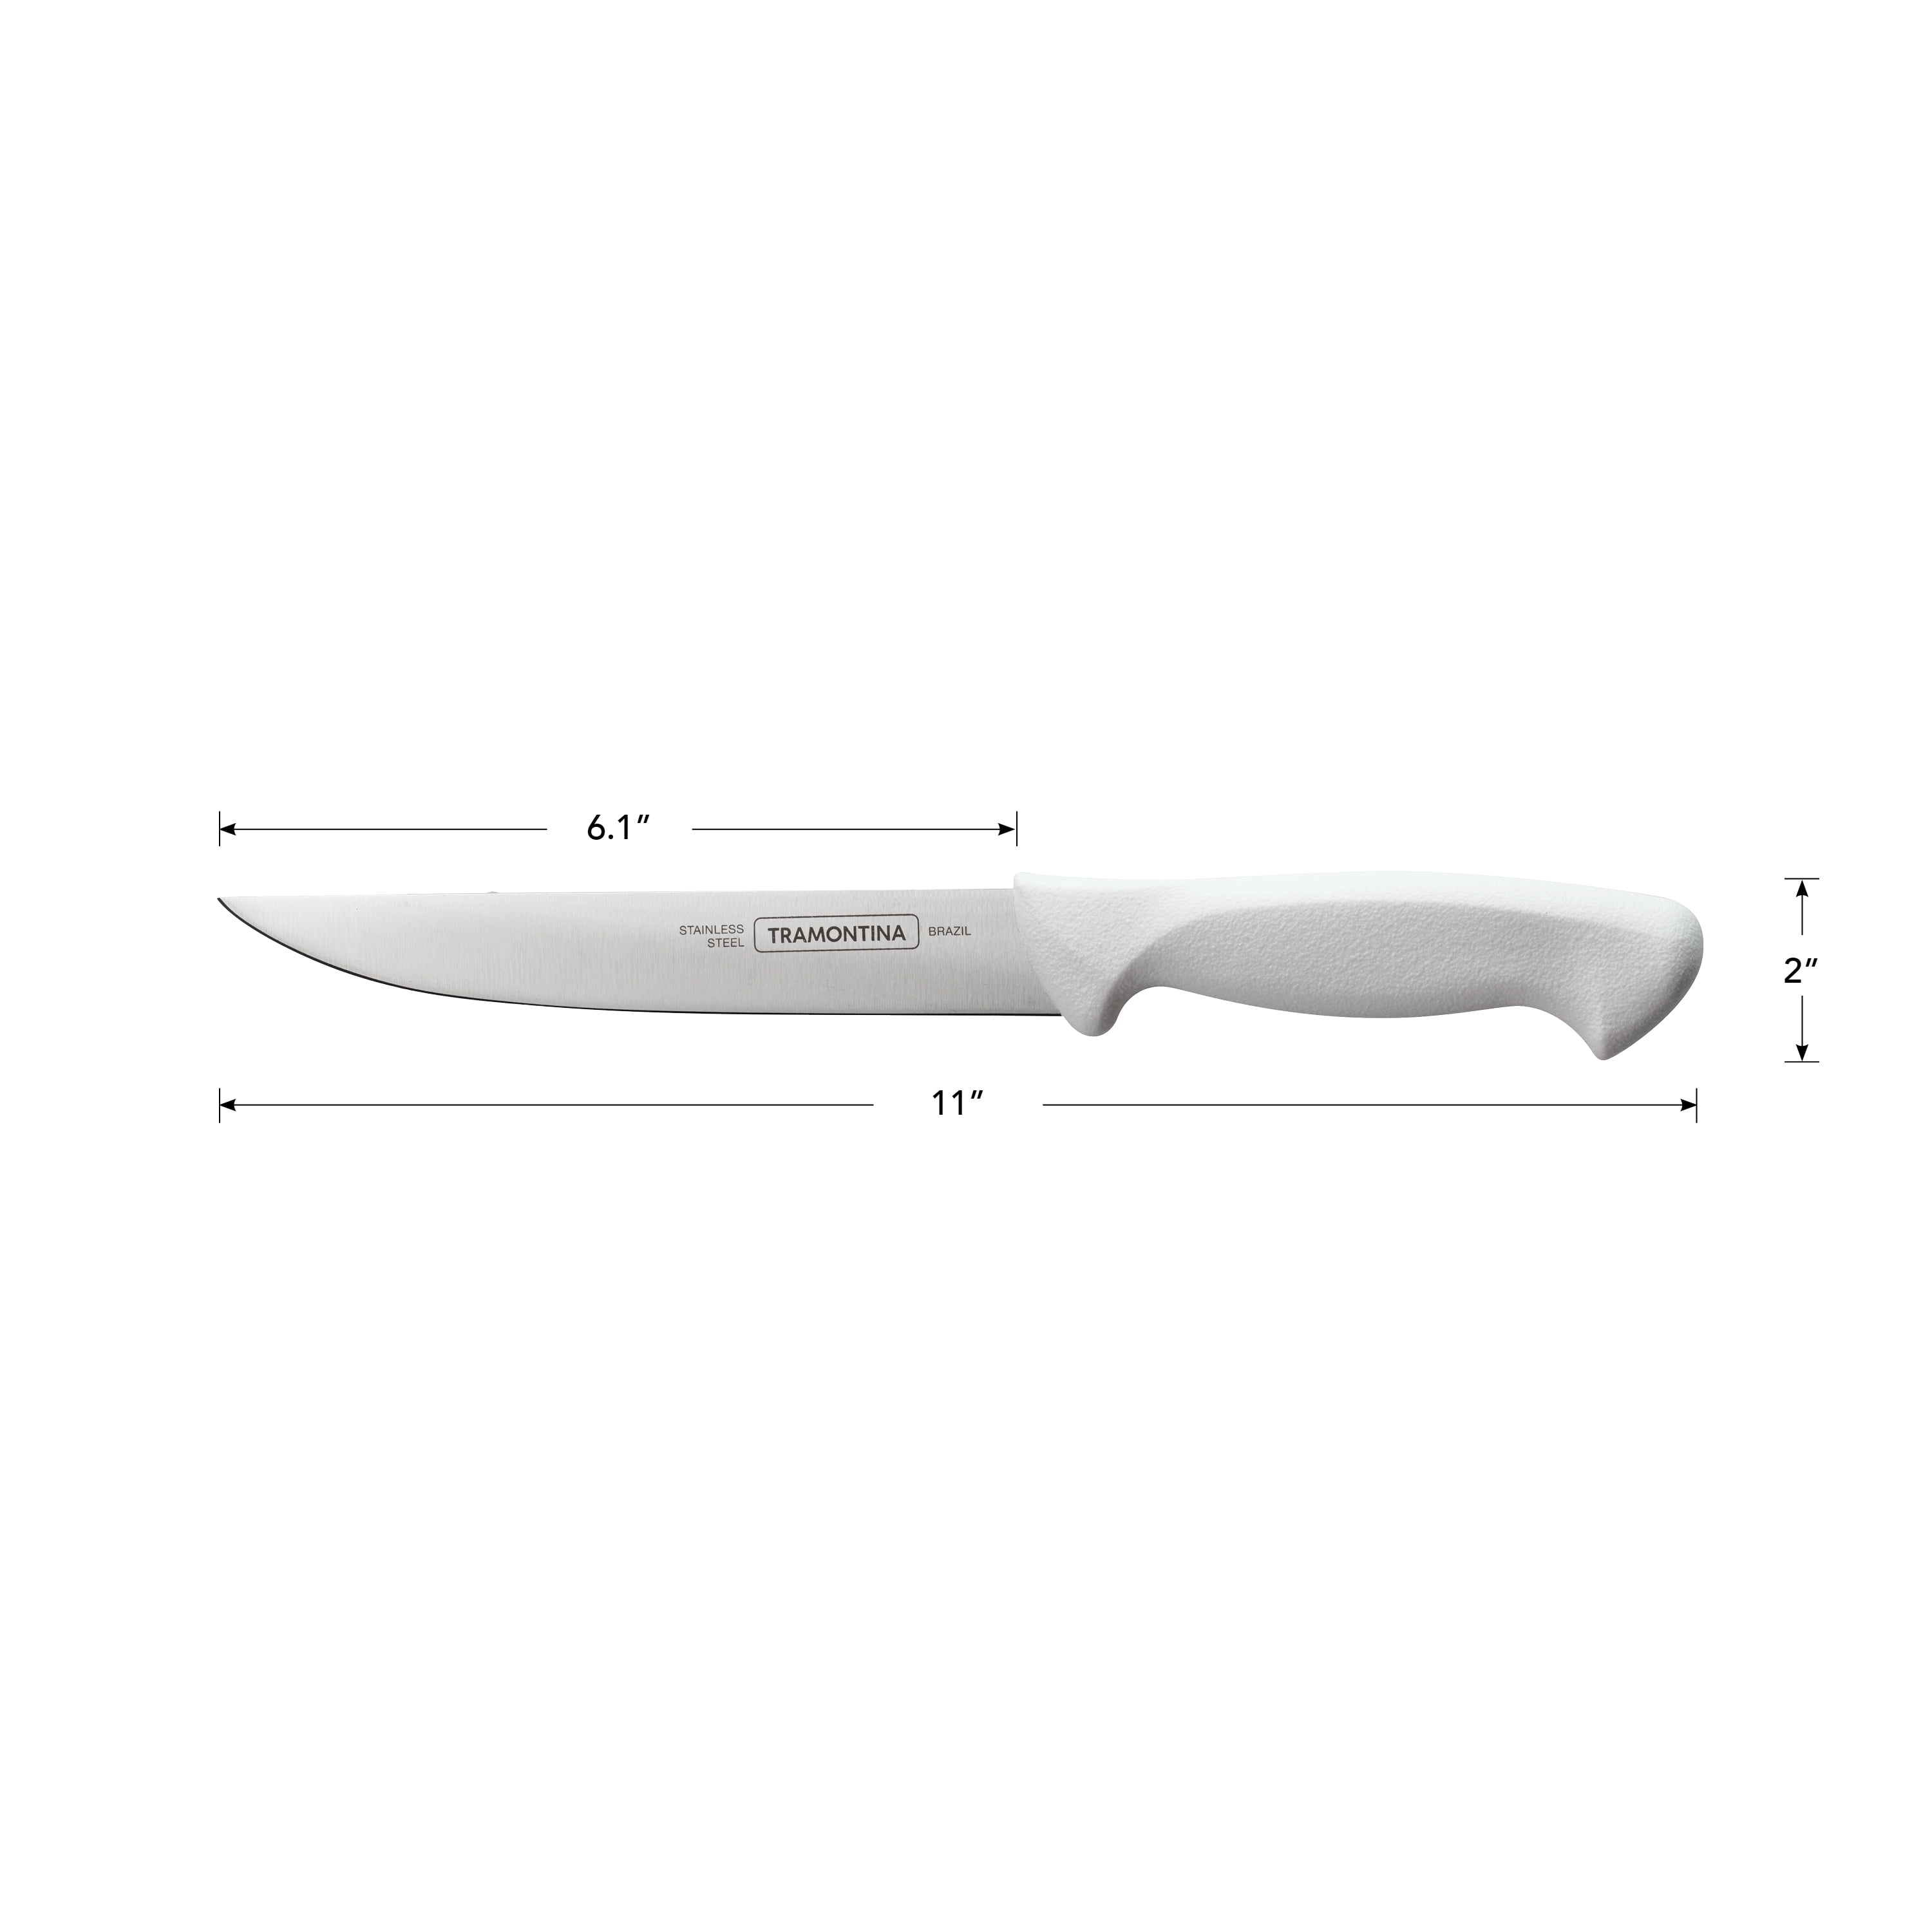 Tramontina Professional Line, A kitchen knife suitable for domestic or  professional use, FROZEN FOOD KNIFE - the knife is made of stainless steel.  The size of the blade is 23.0 cm and